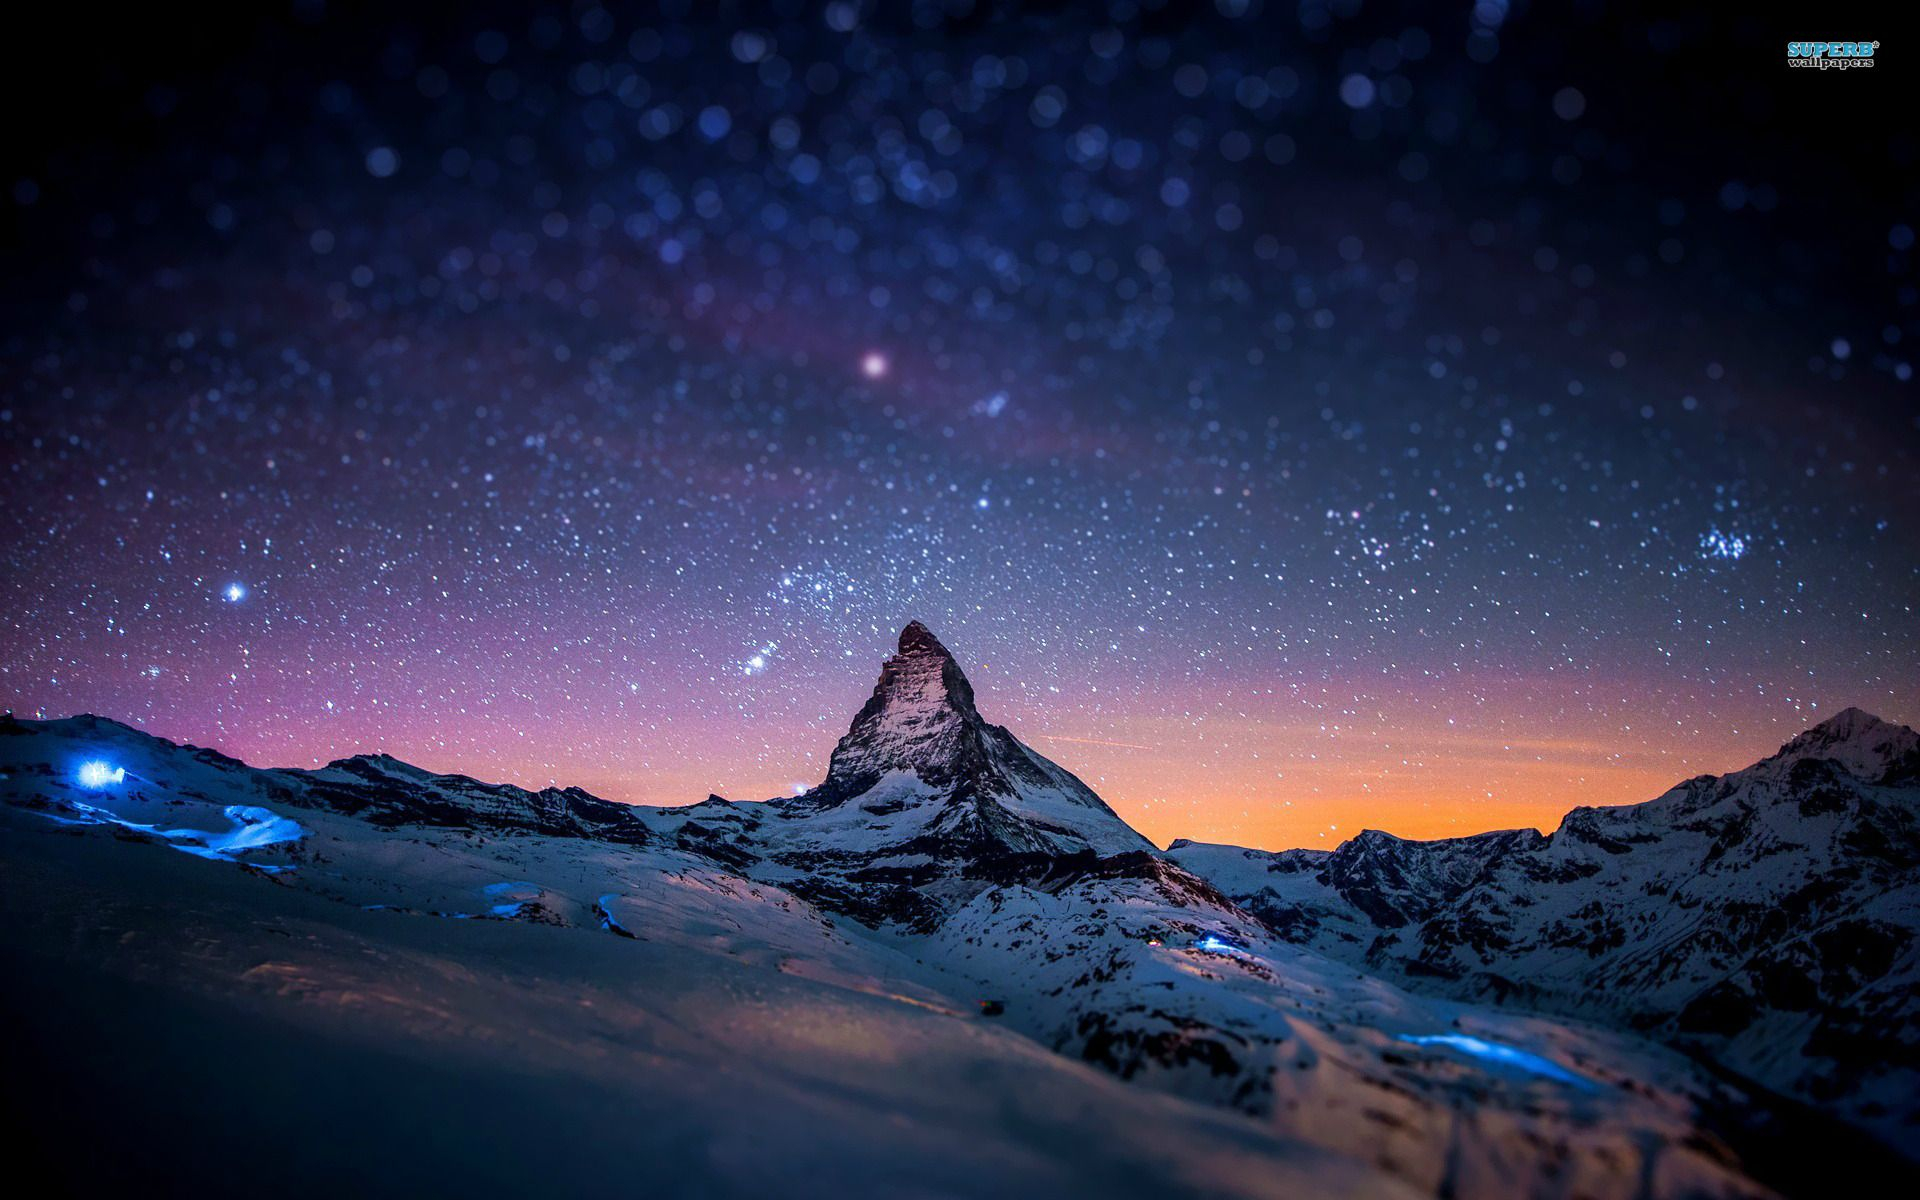 1920x1200 Starry night sky over mountains wallpaper Nature wallpapers | Earth pictures, Night sky wallpaper, Pictures of the week